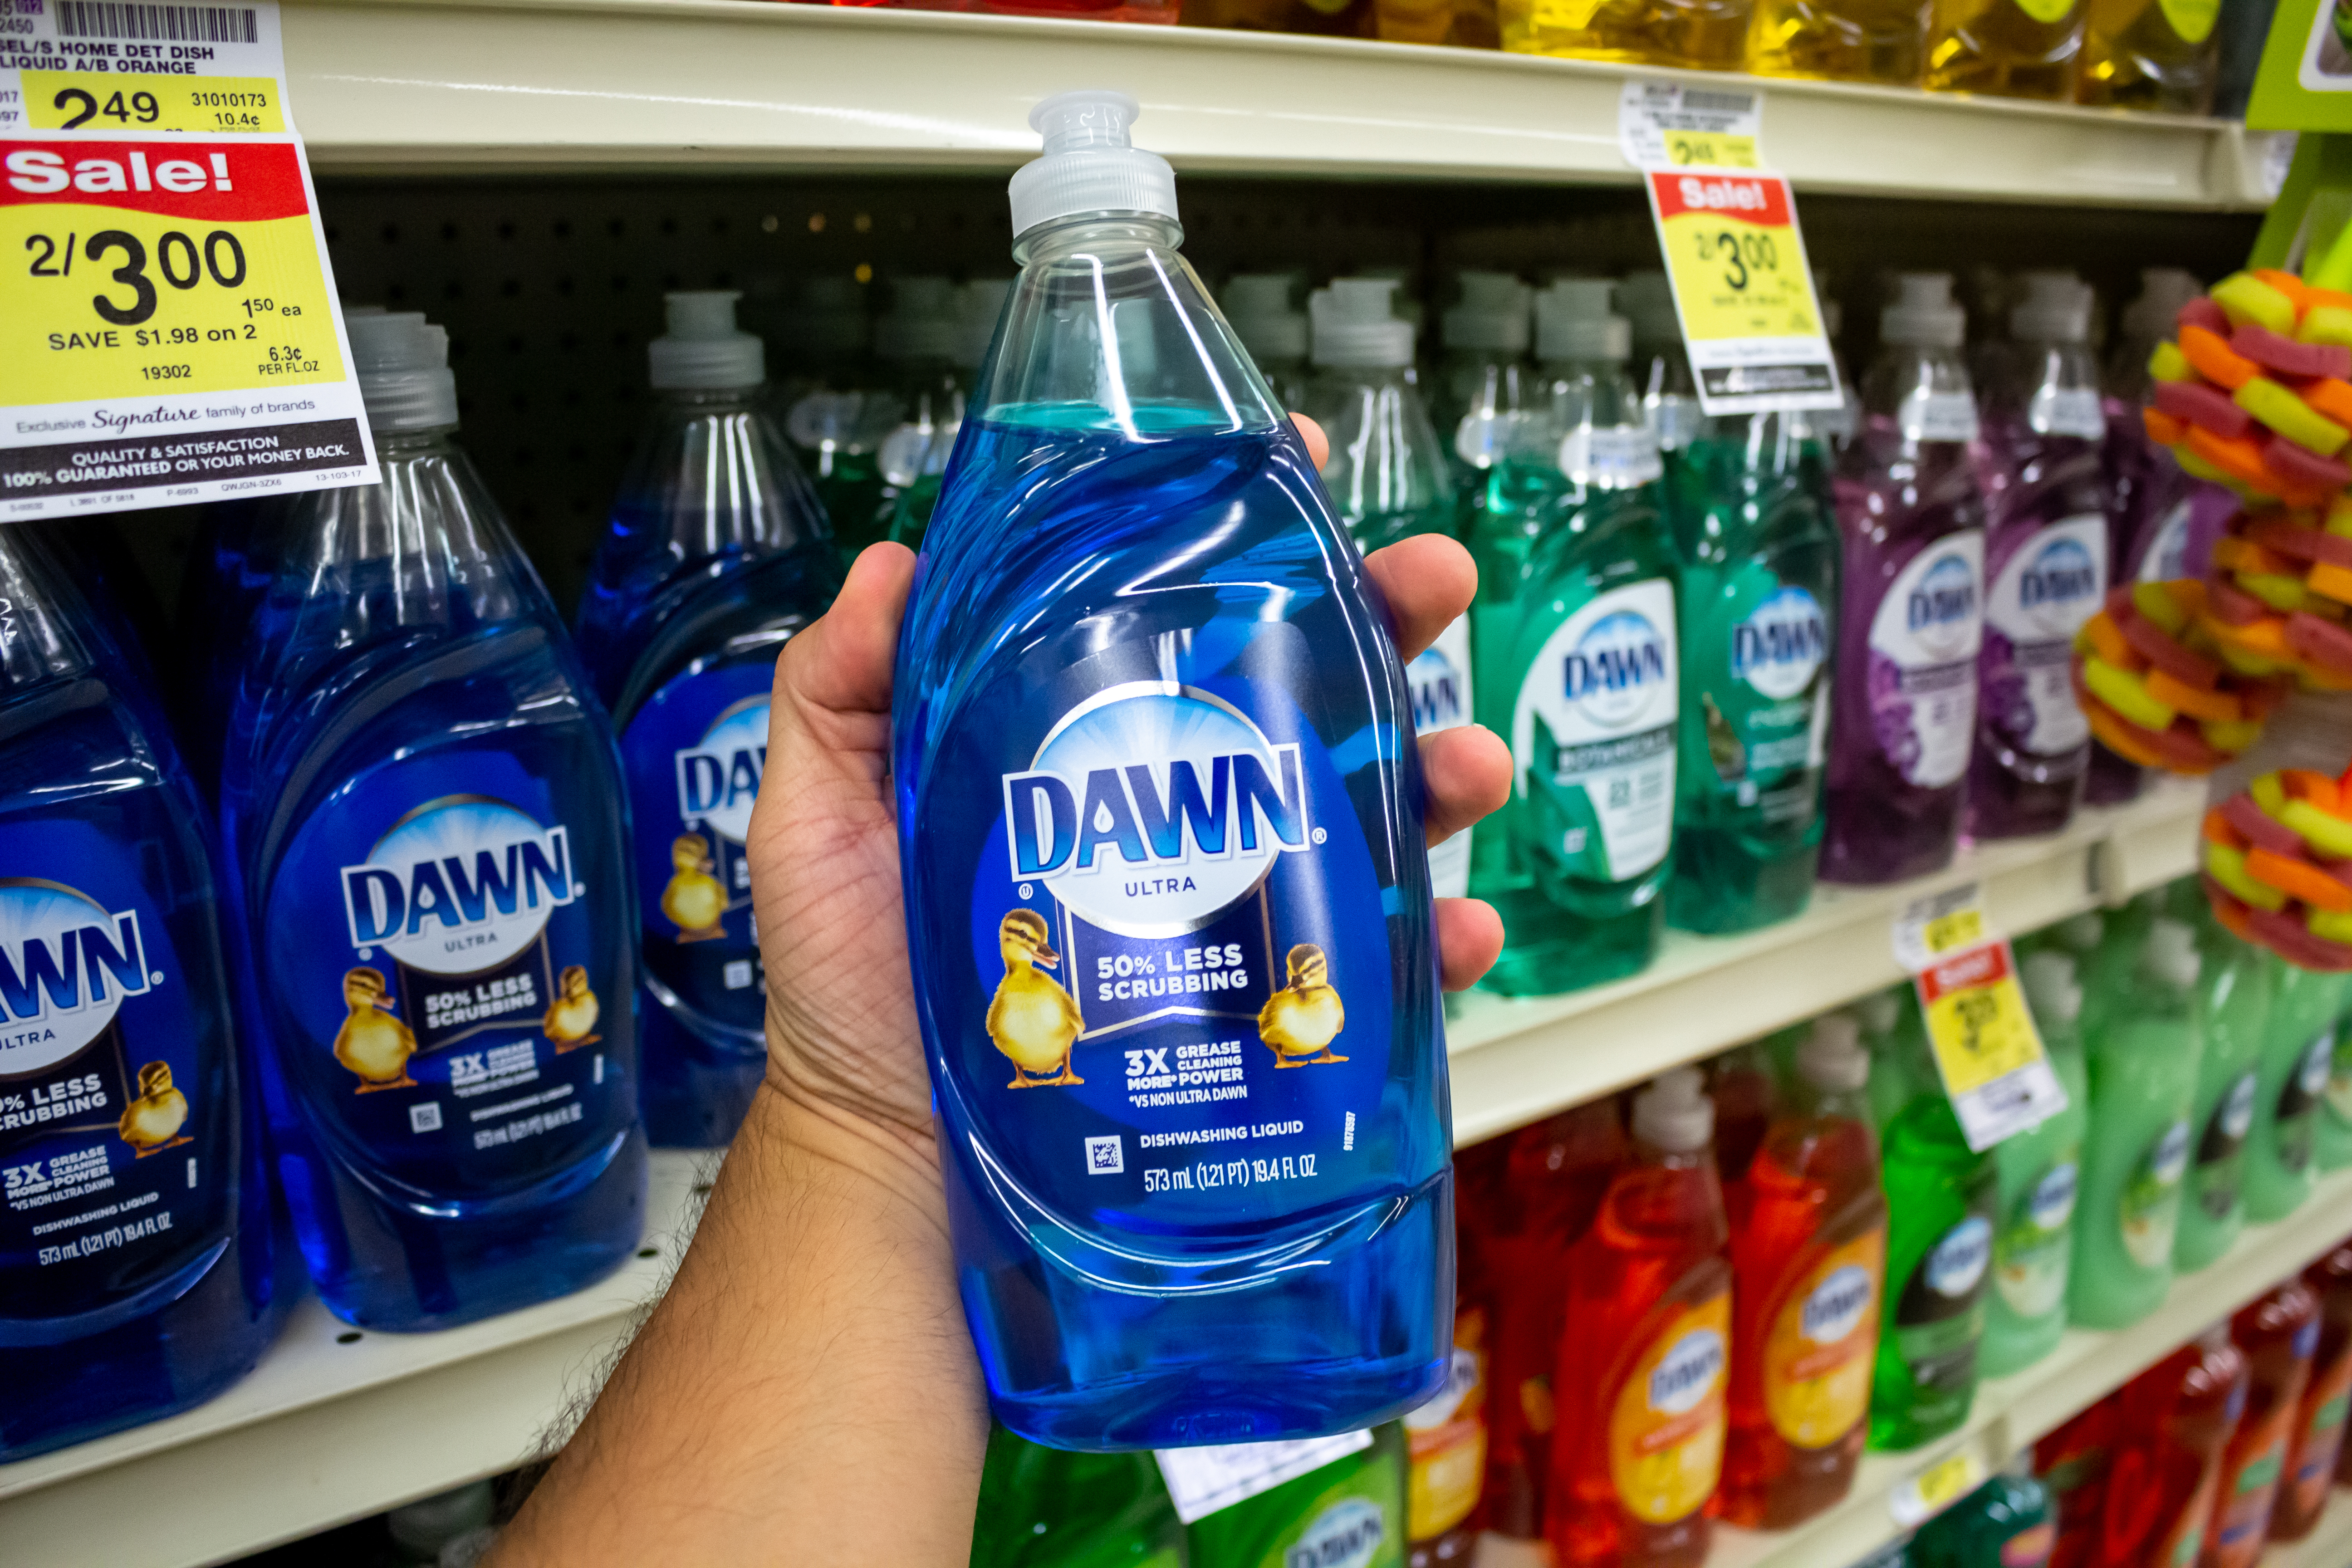 A bottle of Dawn dish soap in a grocery store | Source: Shutterstock